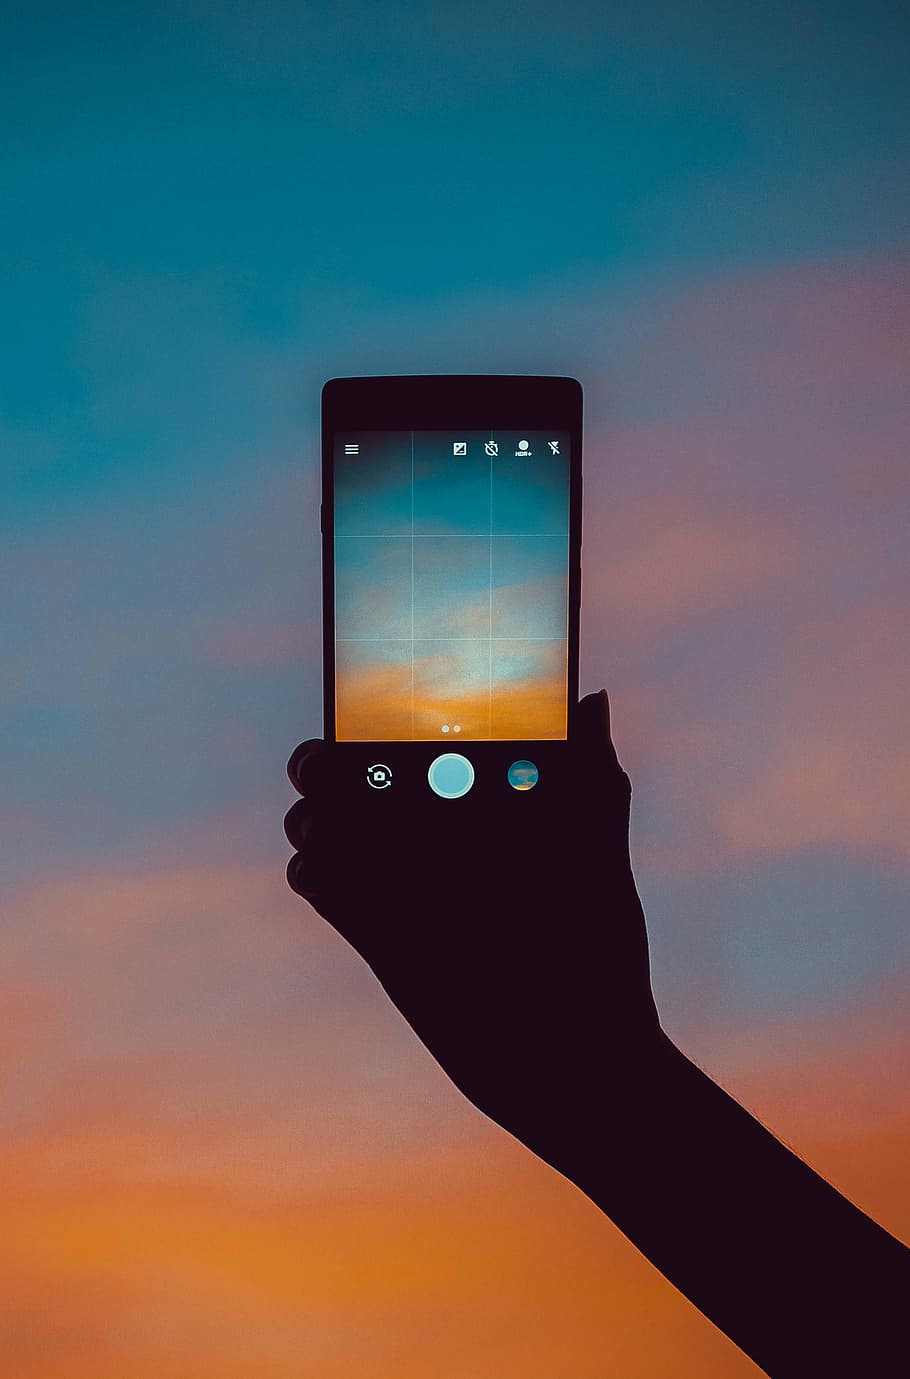 person, holding, black, android smartphone, capturing, sky, mobile, phone, camera, photography